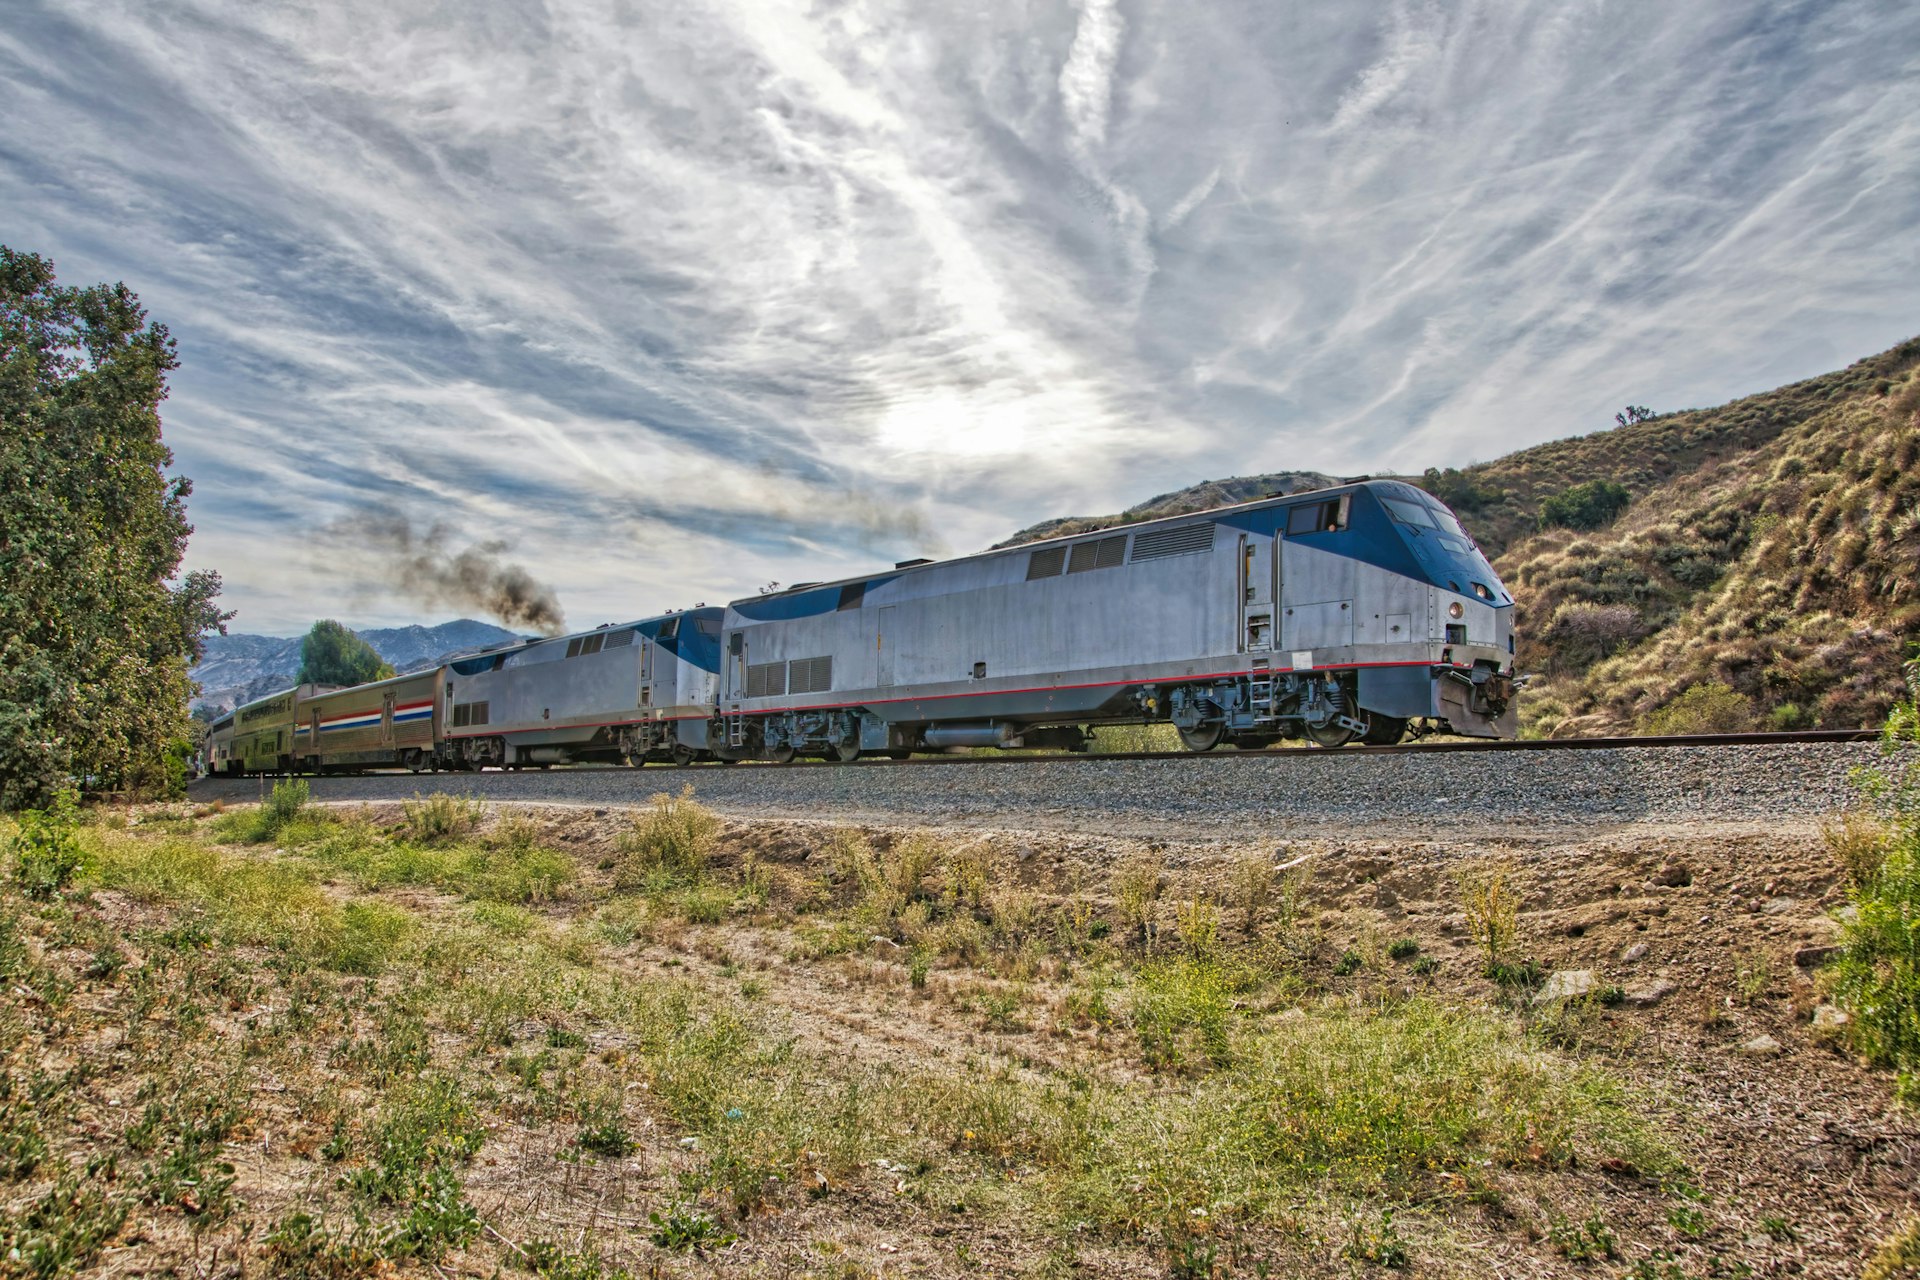 The Amtrak Coast Starlight Train passes along a track through hilly terrain en route to Los Angeles 